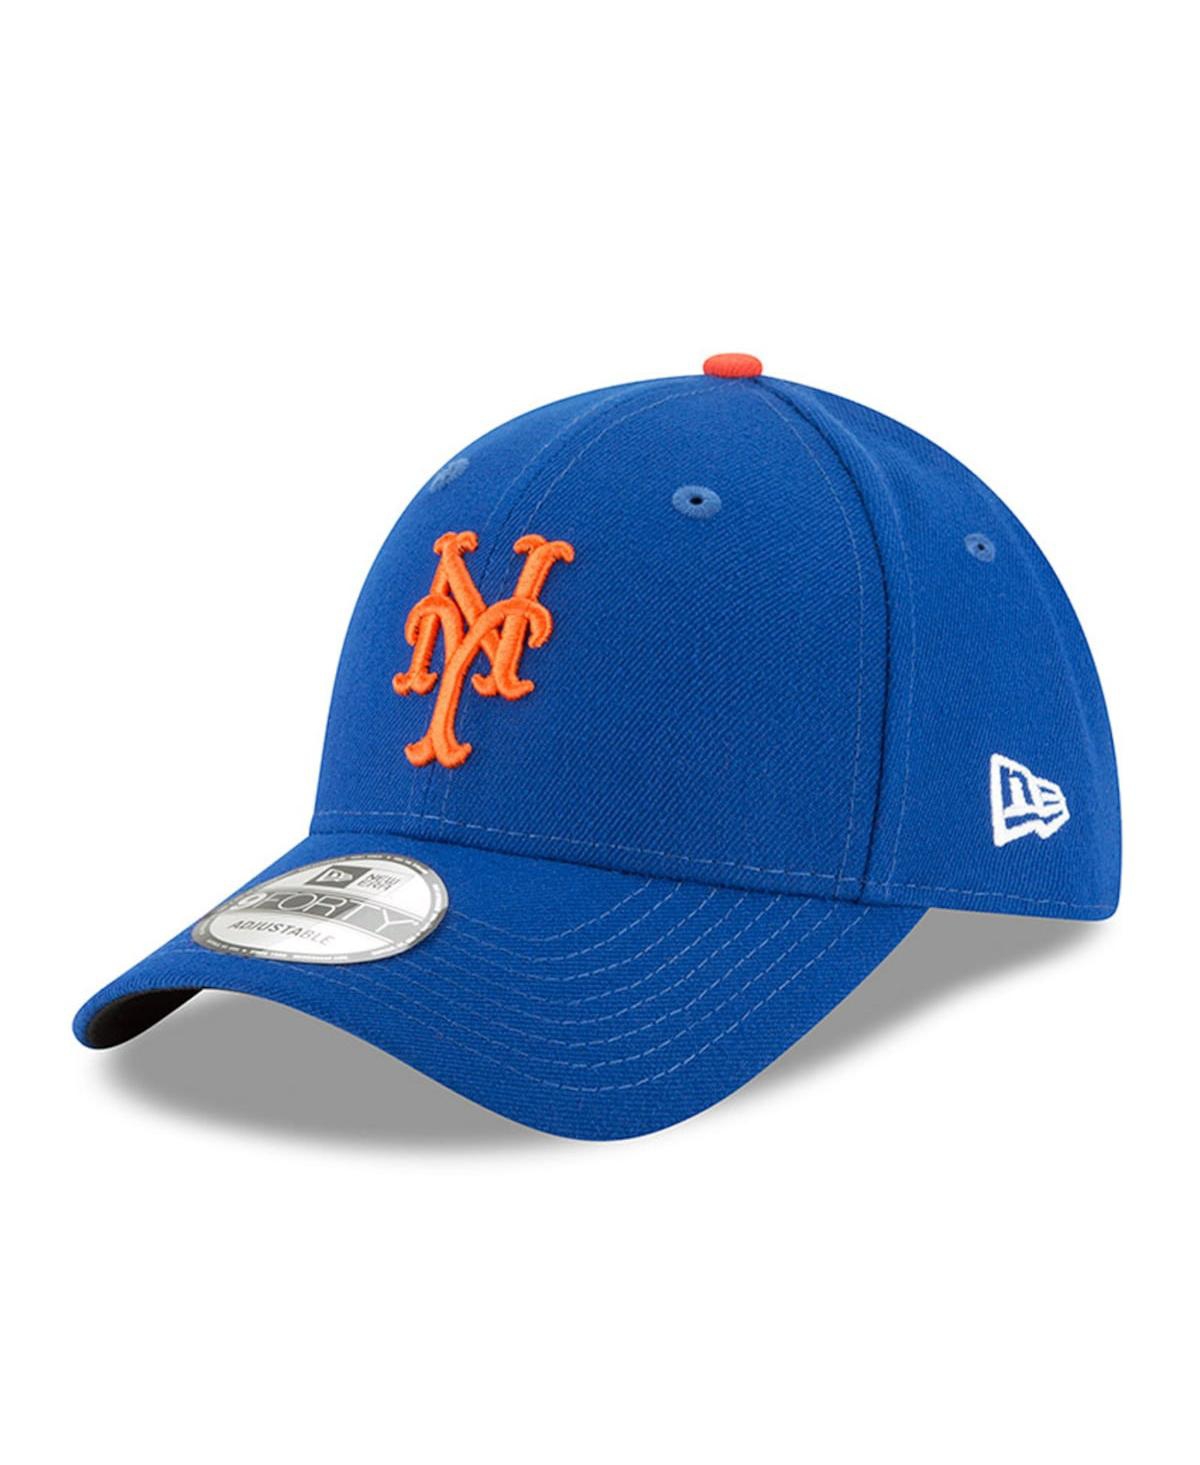 UPC 719106169695 product image for Men's New Era Royal New York Mets League 9Forty Adjustable Hat | upcitemdb.com